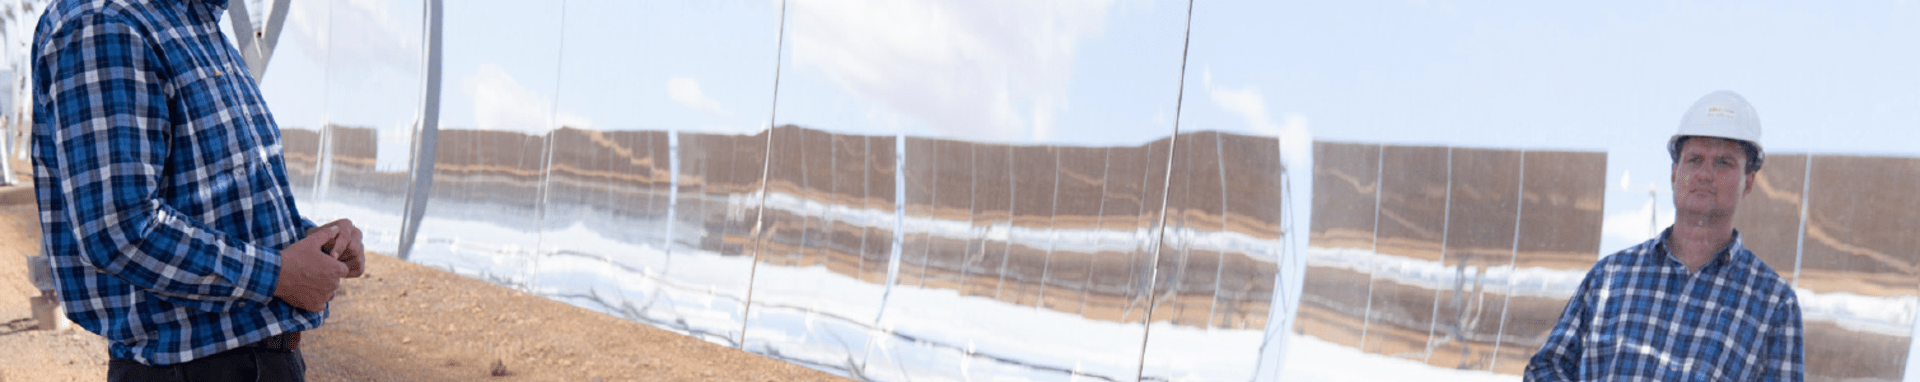 Transformational Change Case Study | The Role of Concentrated Solar Power in Tackling Climate Change